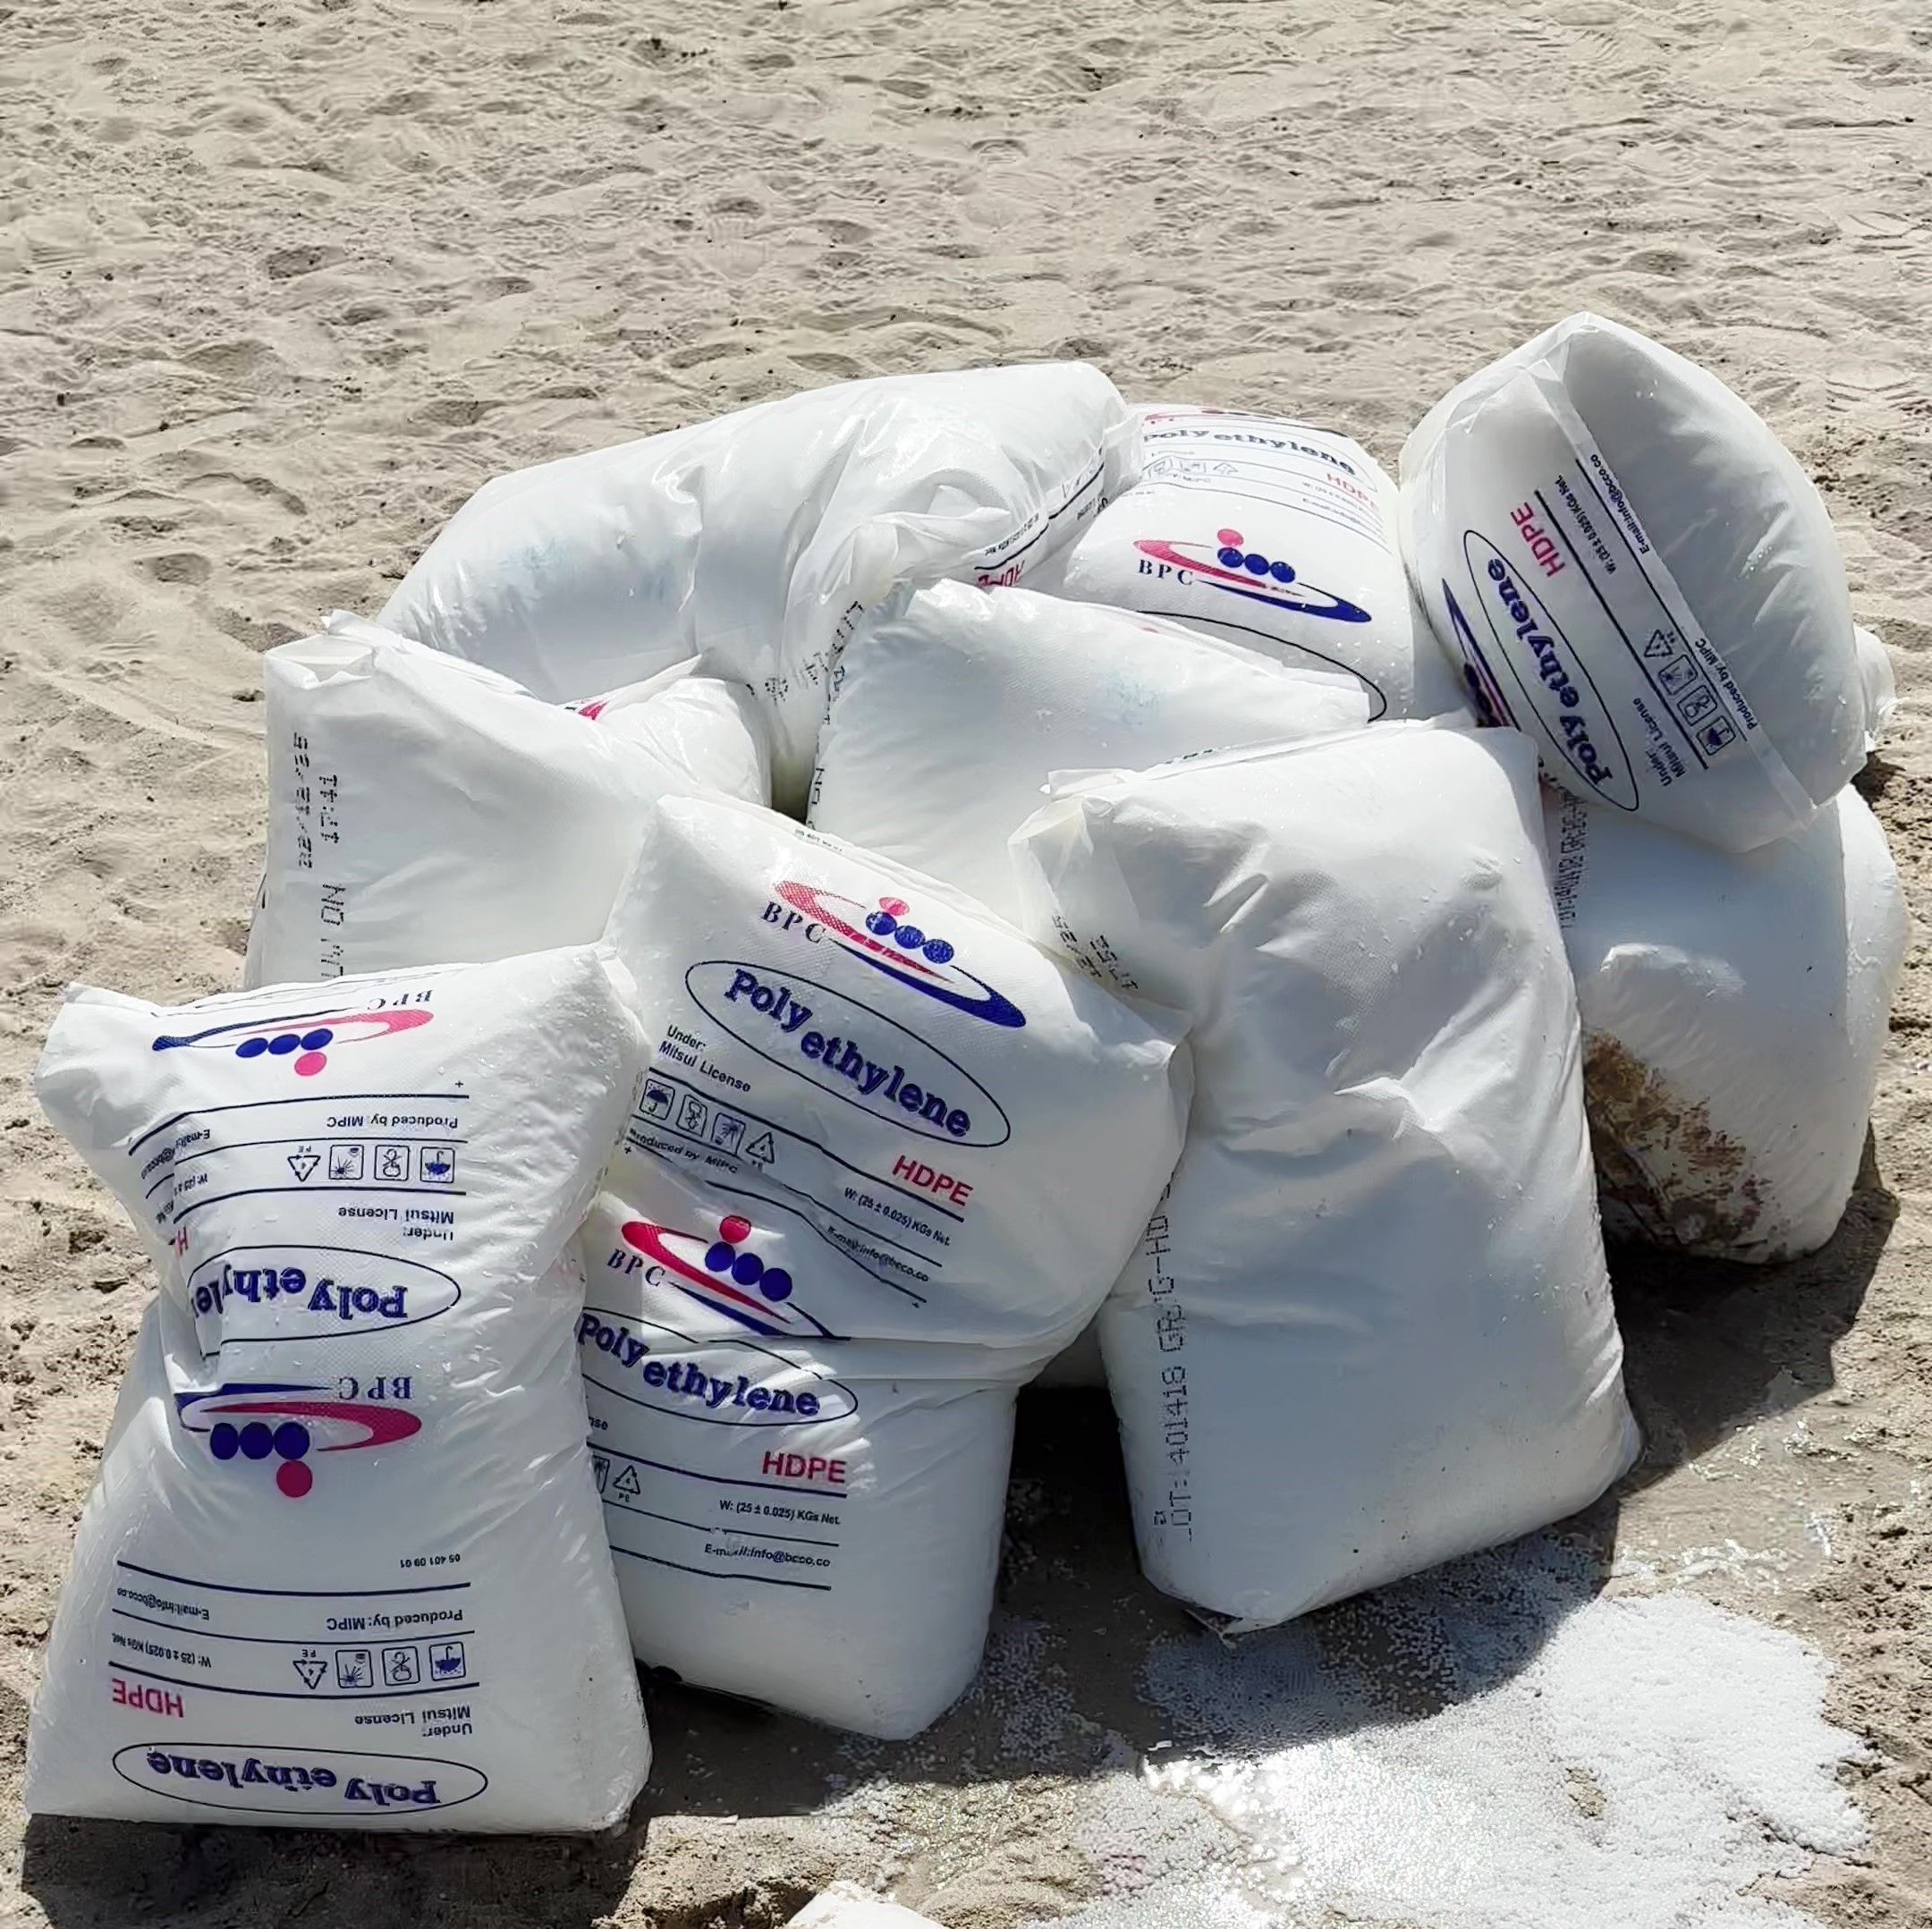 Bags of plastic pellets wash up on Sunset Beach (Credit: Gerry Blaksley https://www.instagram.com/gblaksley)